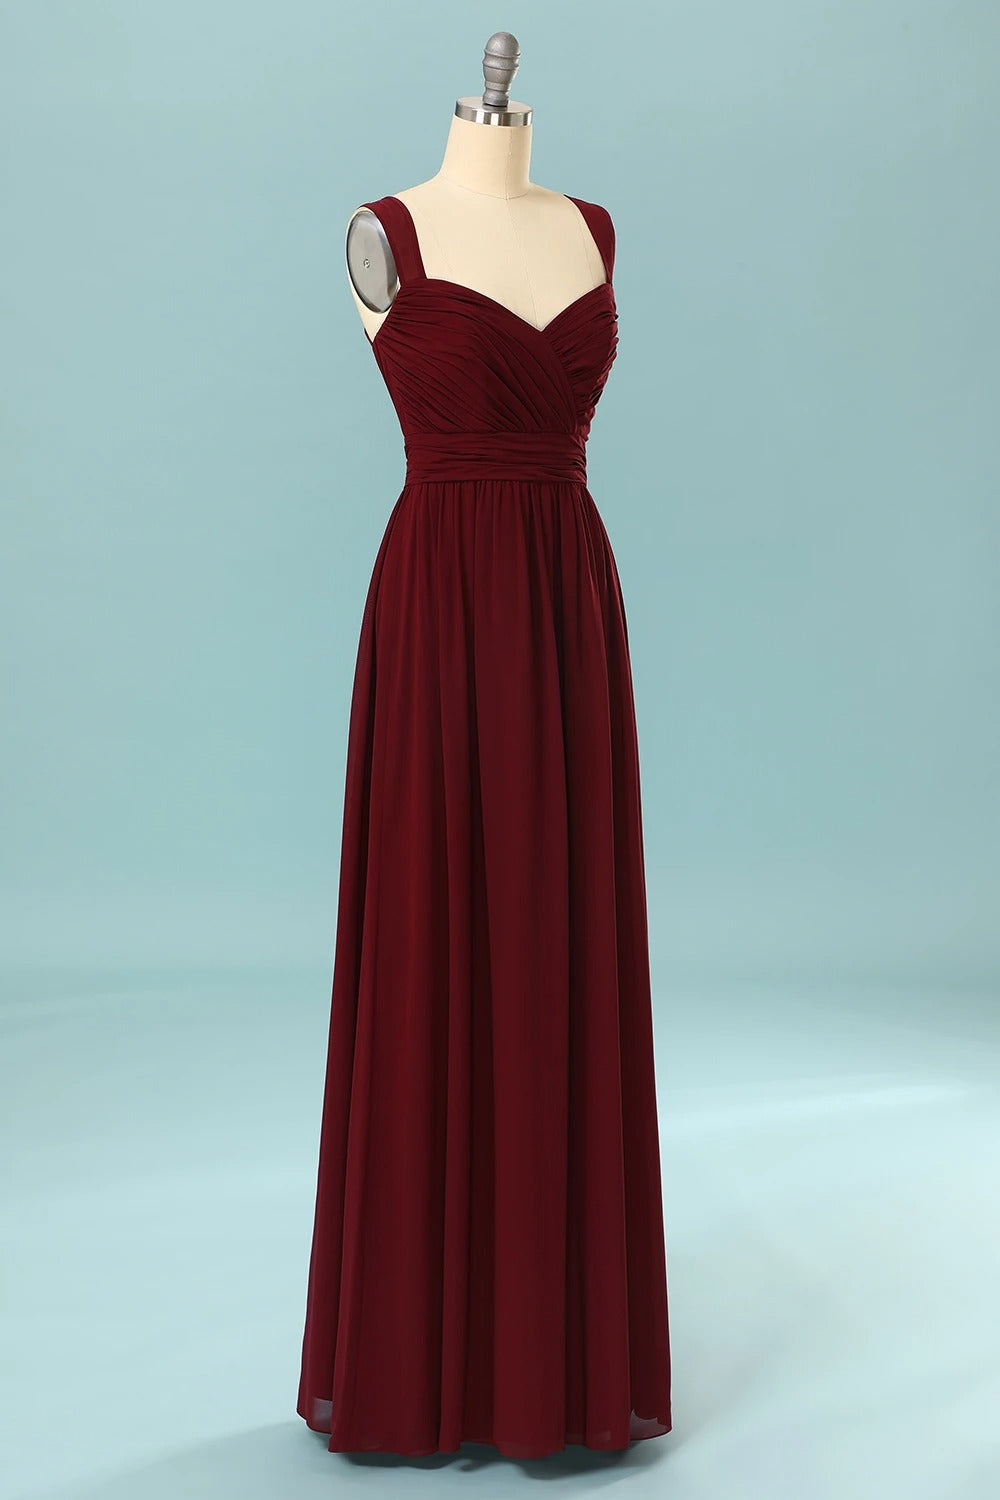 Elegant Pleated Burgundy Corset Bridesmaid Dress with Keyhole outfit, Party Dress Glitter